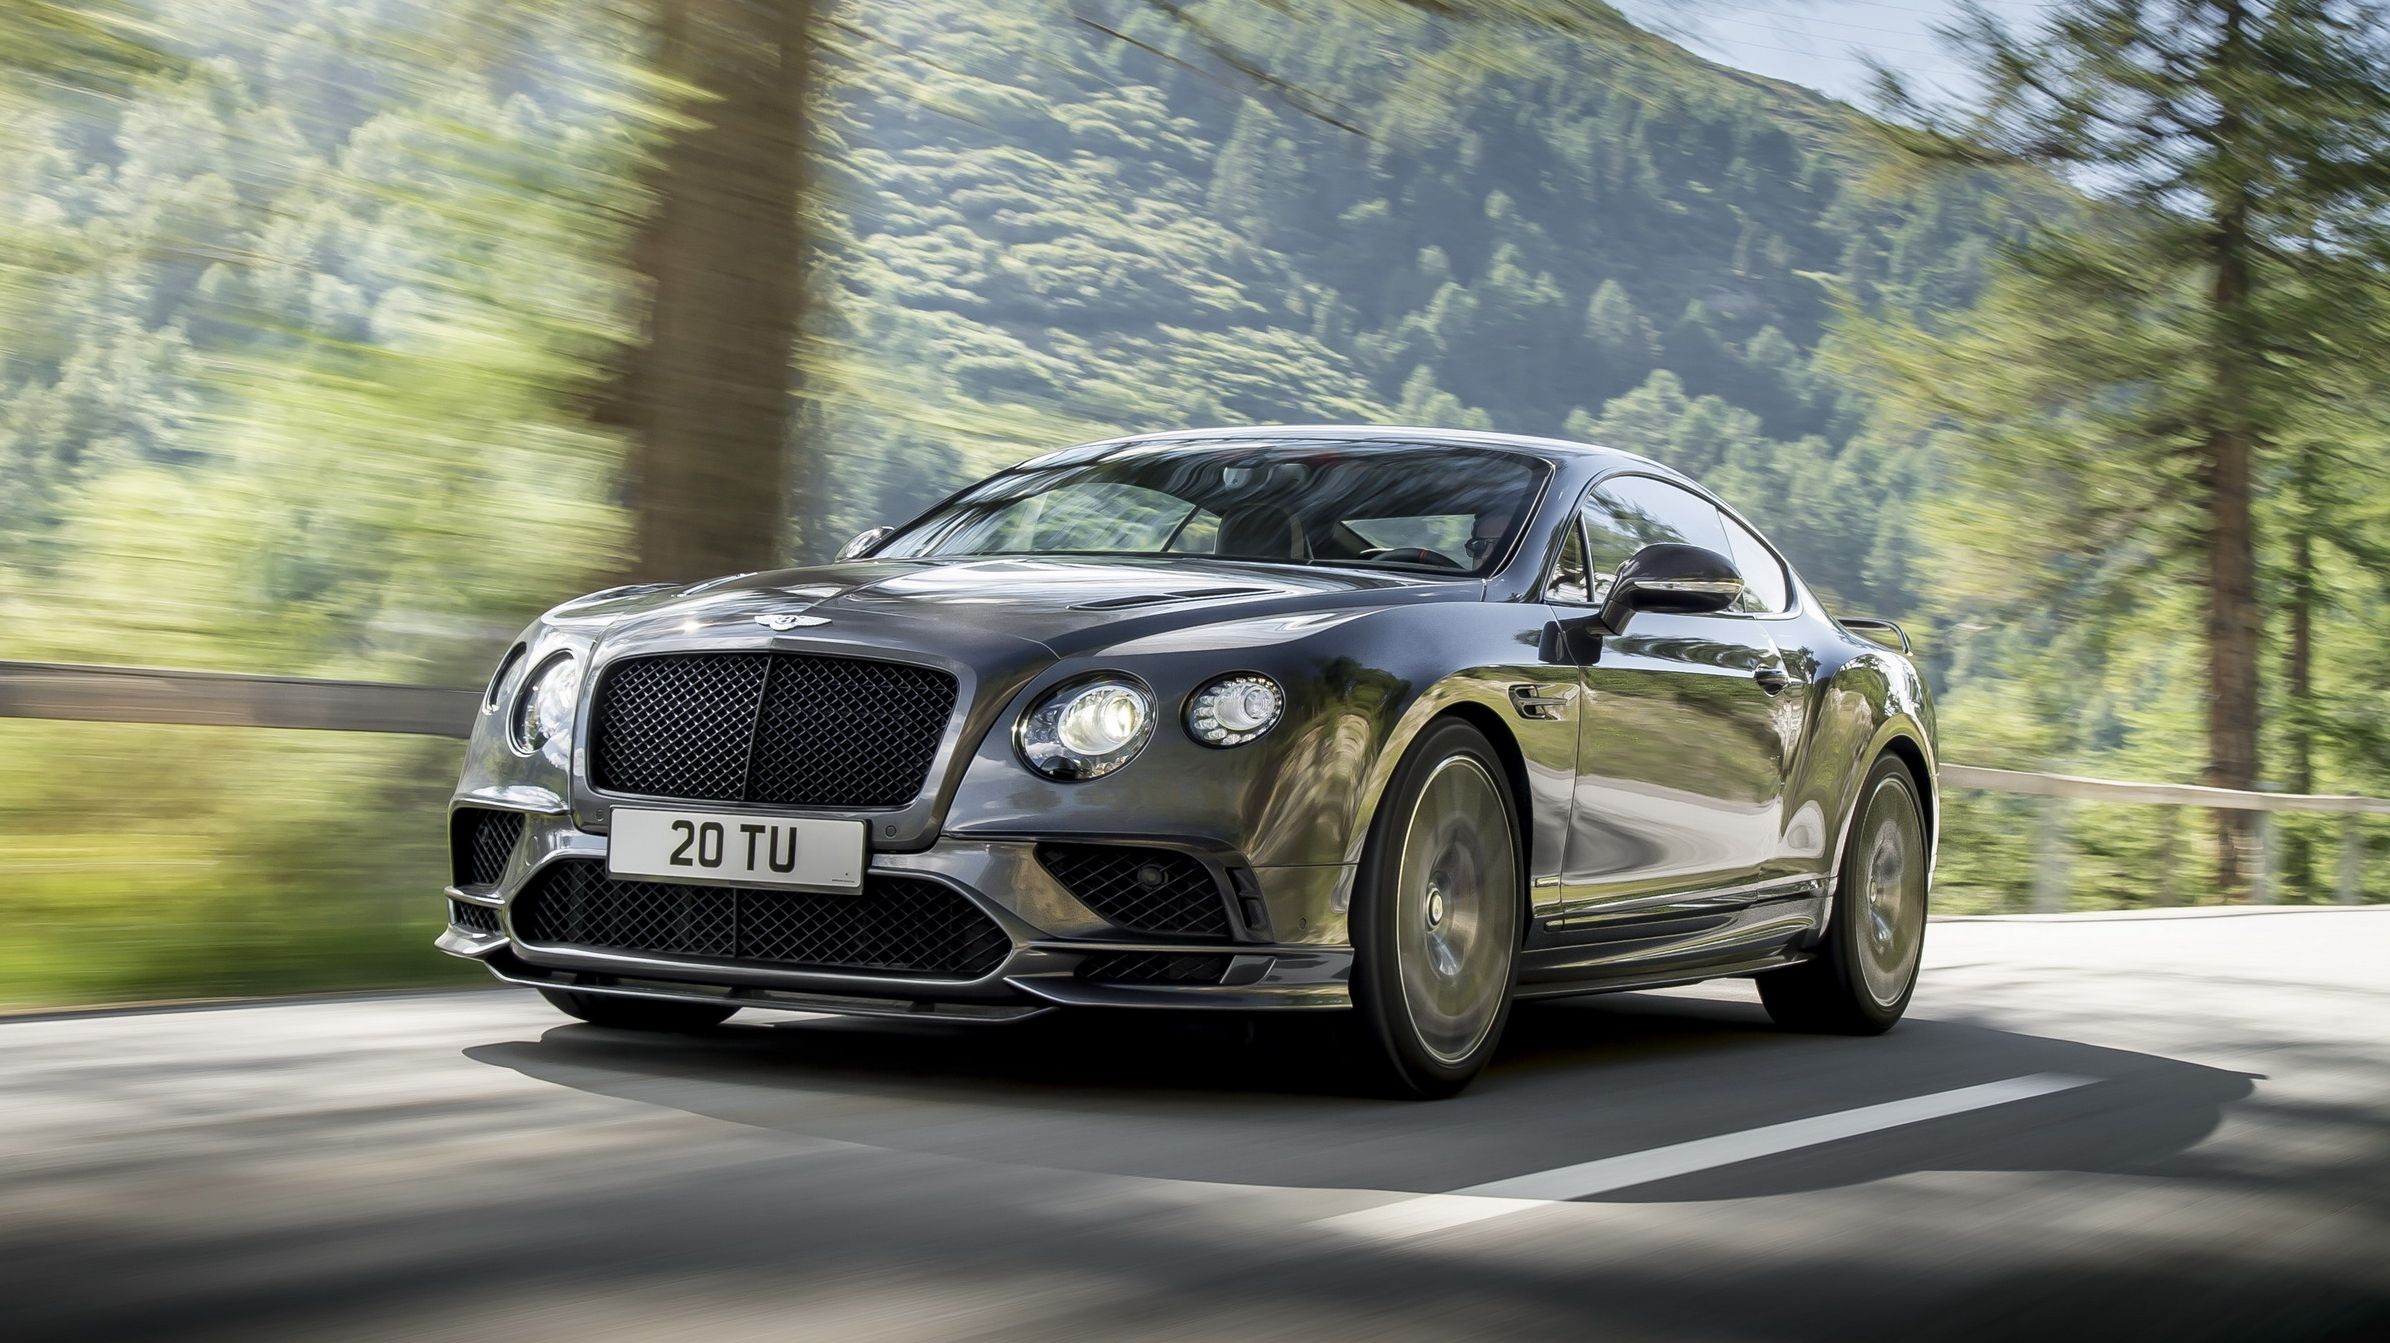 2018 The Bentley Continental Supersports Is The Continental Variant We've All Been Waiting For